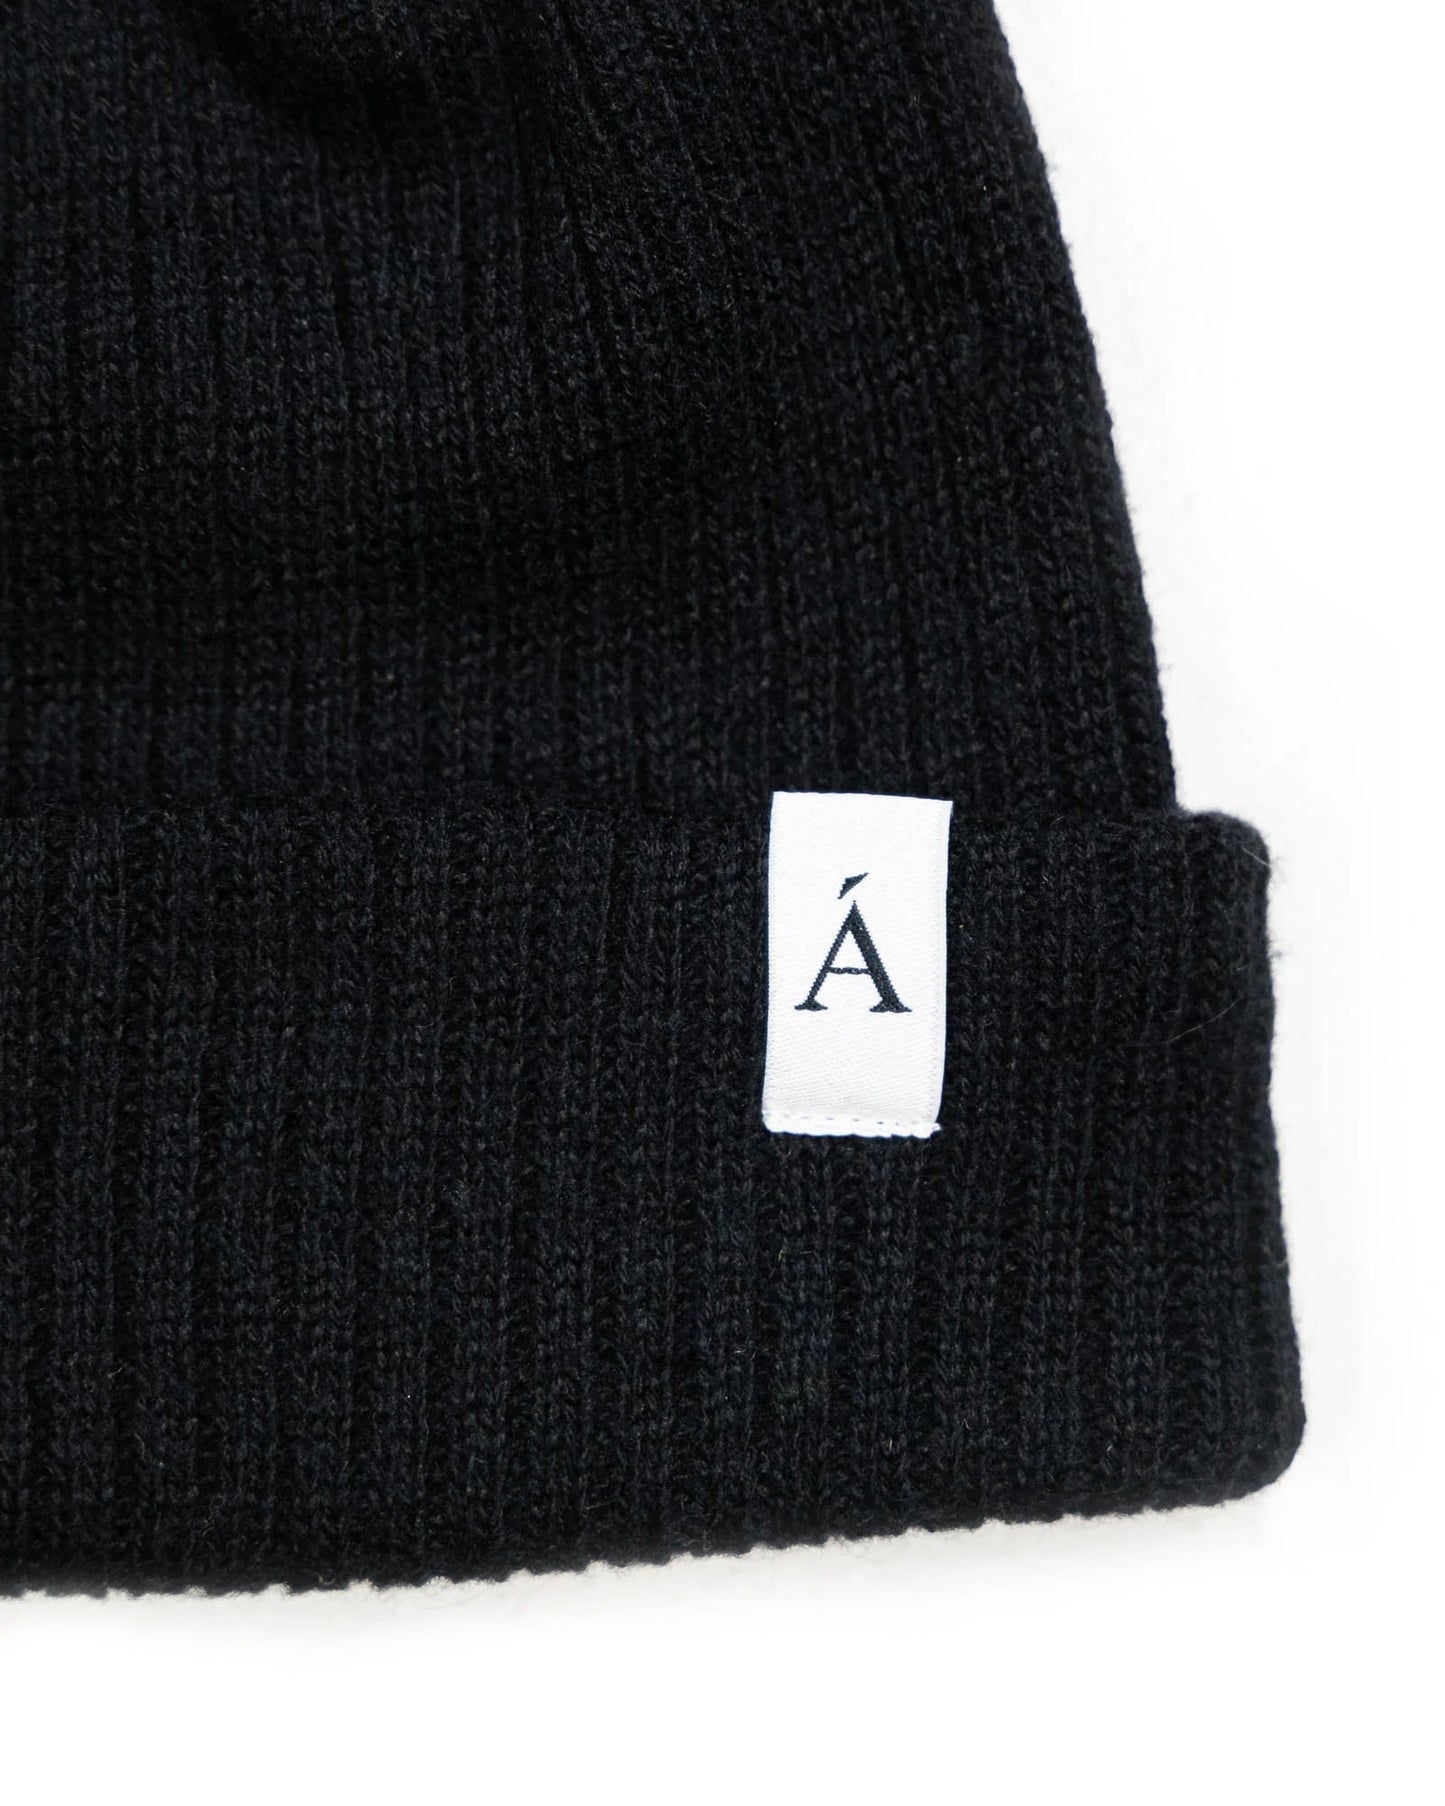 Recycled Cashmere Beanie in Nero